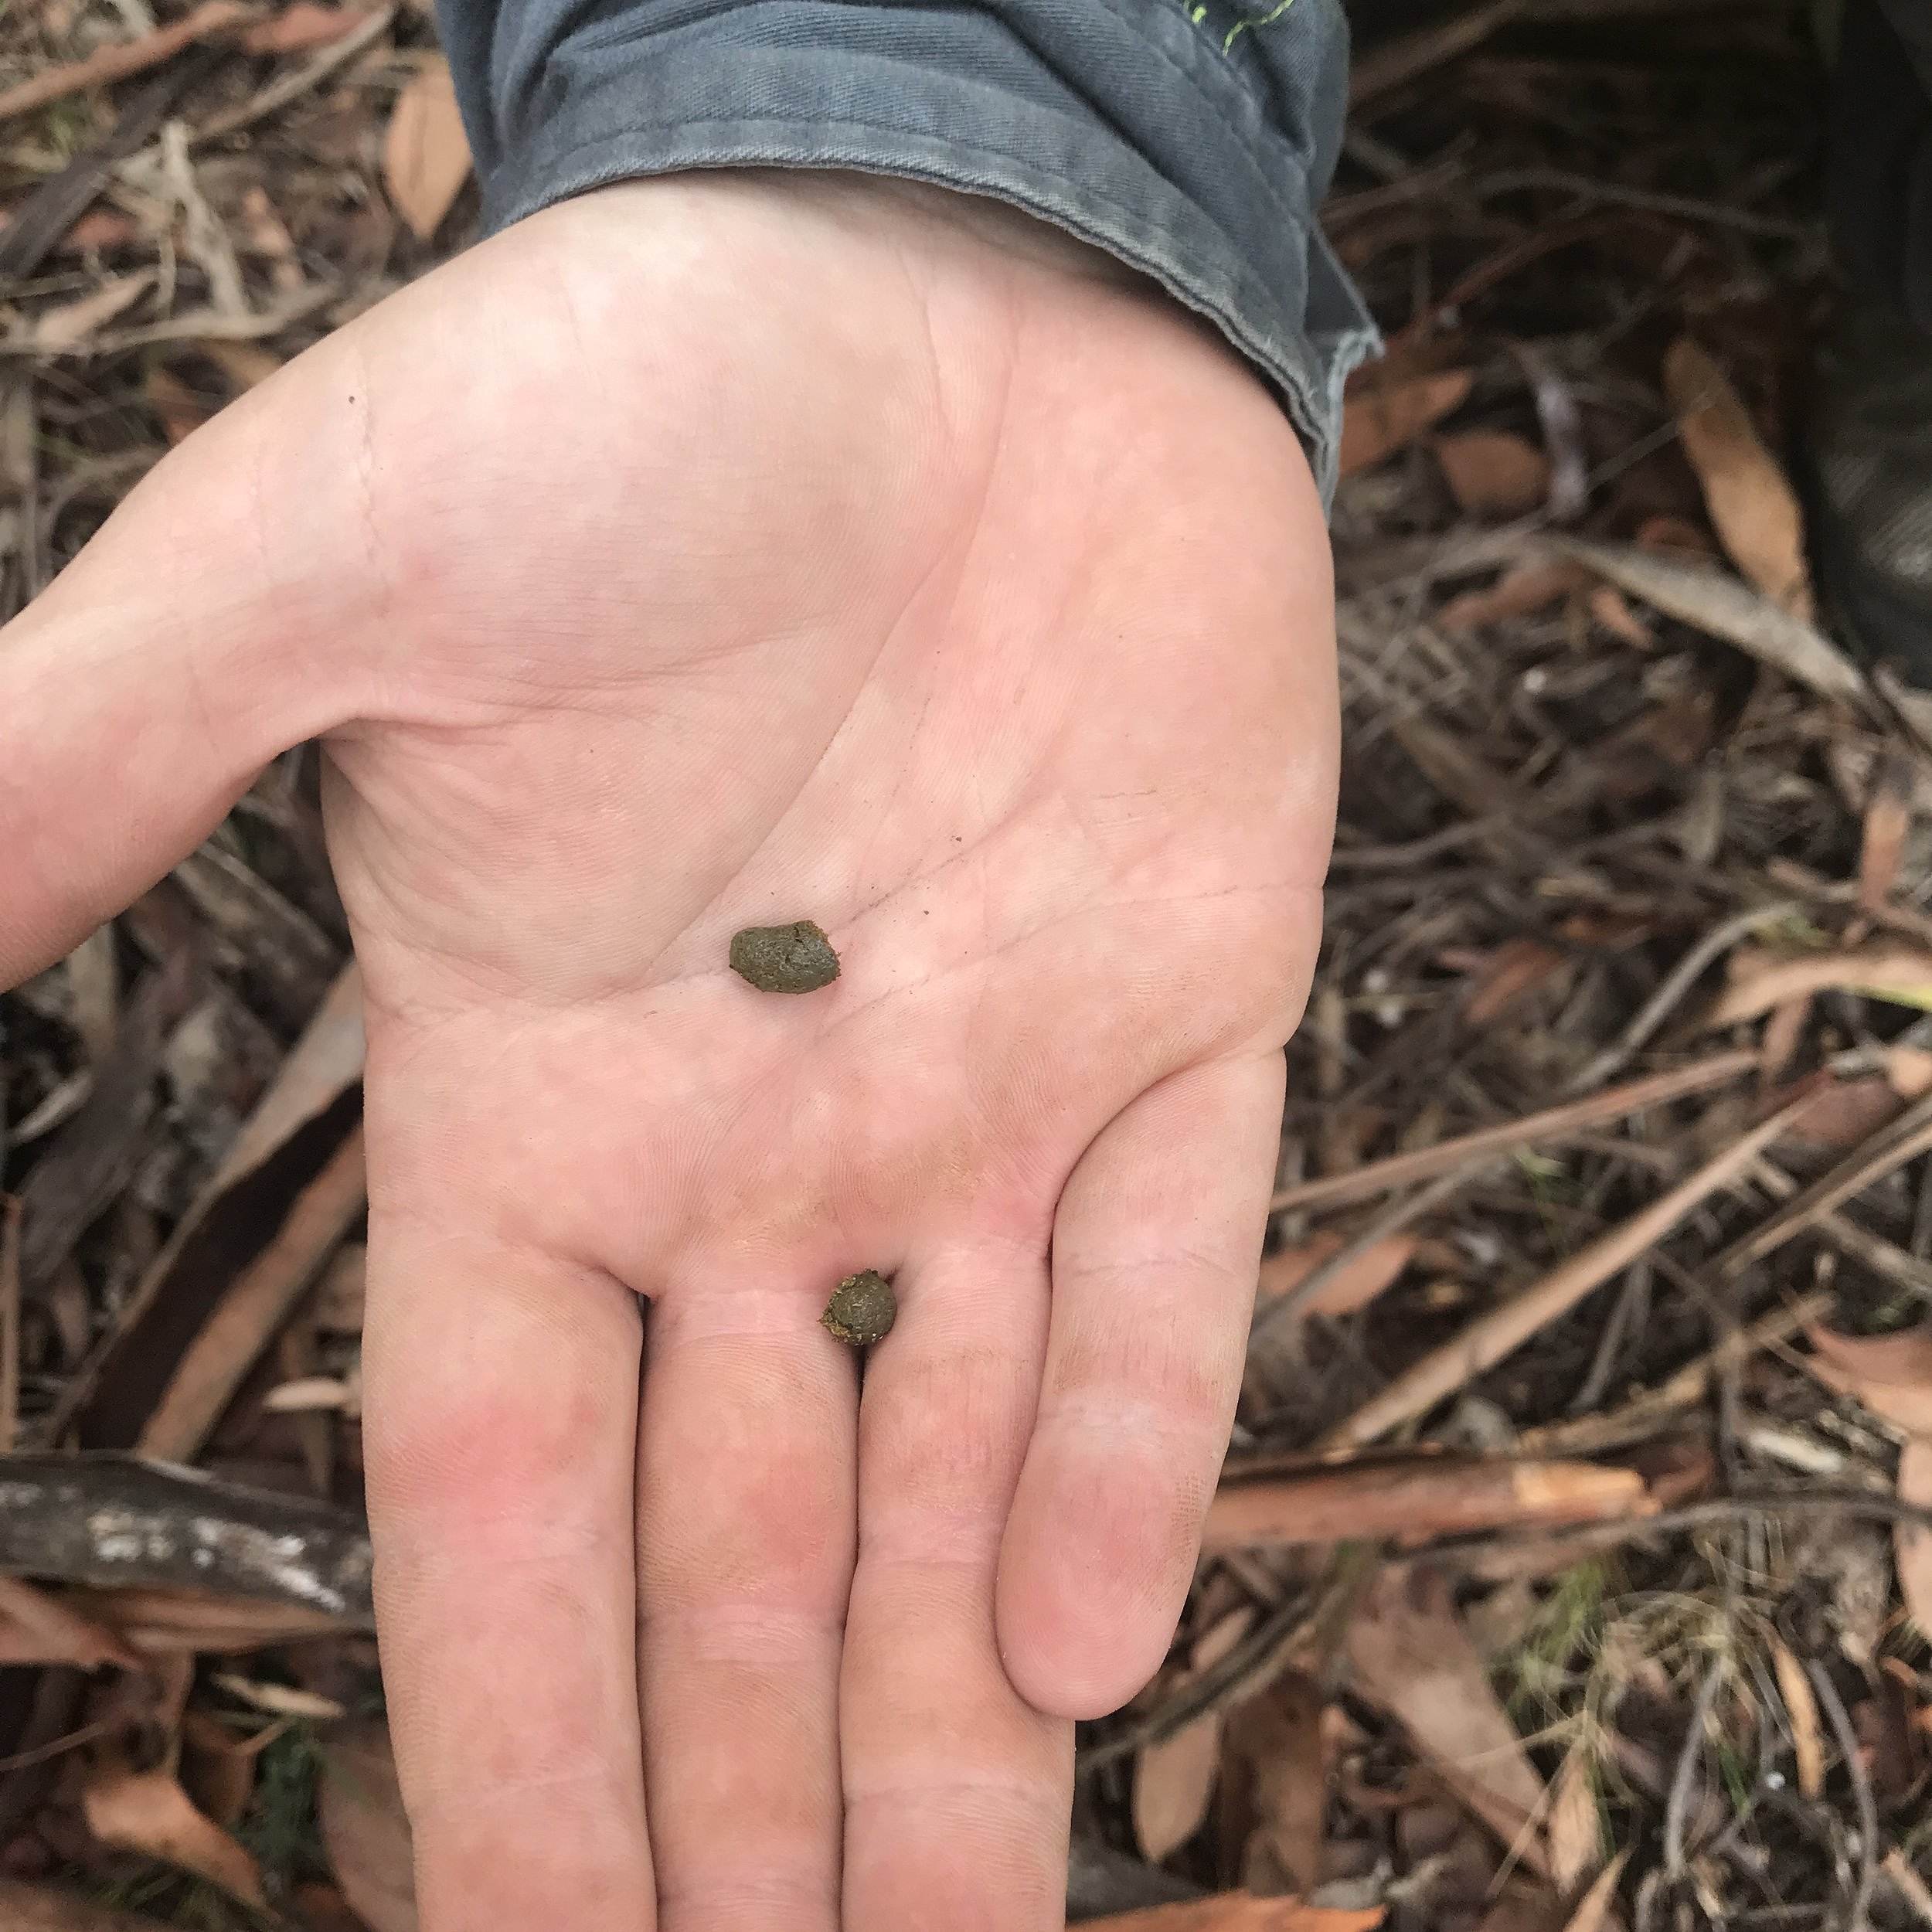  Evidence of Greater Glider recent activity - fresh  scat  